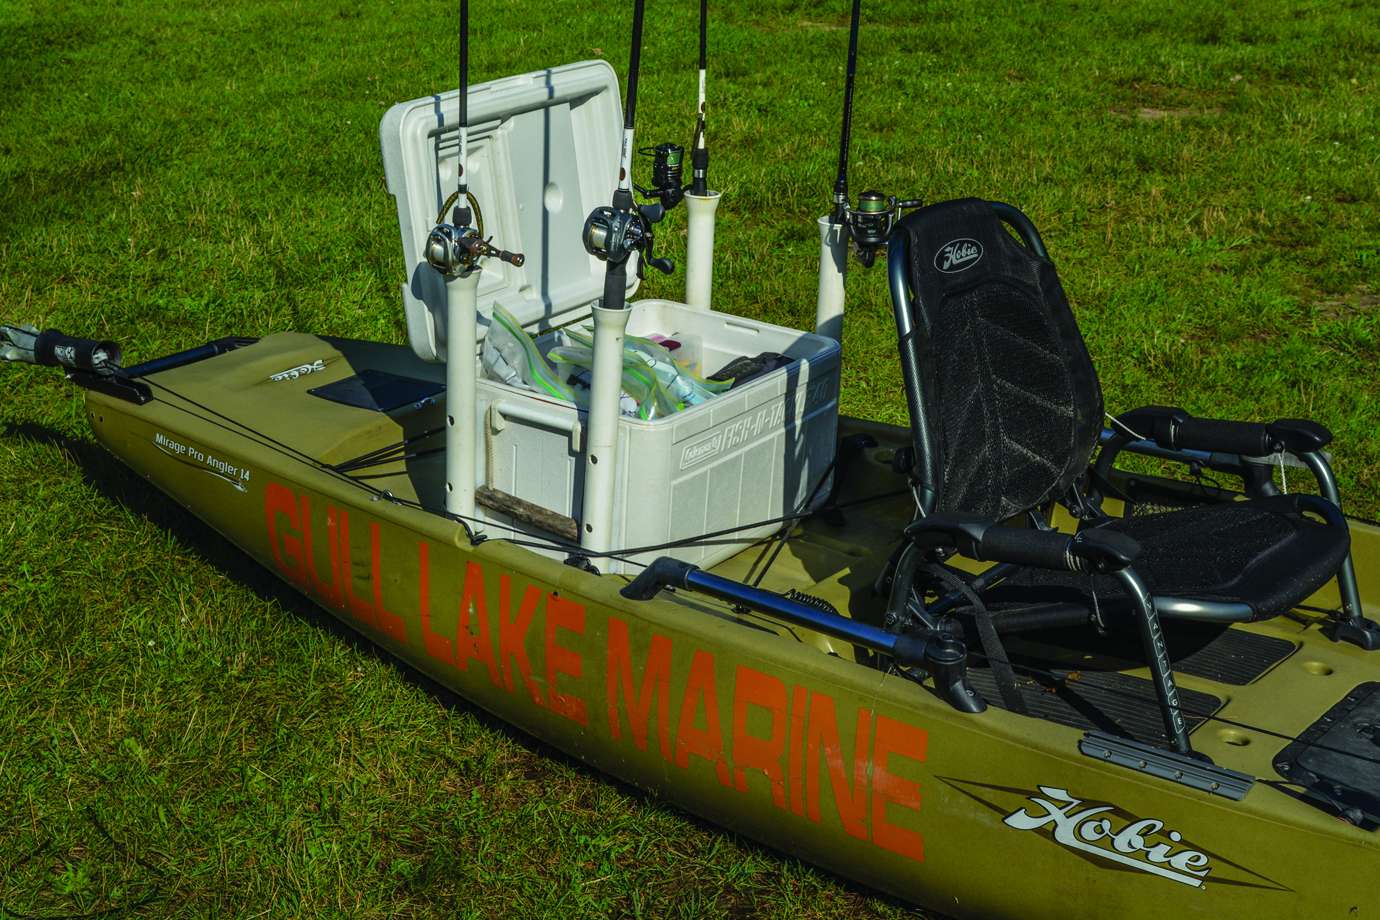 A cooler can turn into a tackle crate that carries four rods outside and lots of tackle inside. Want a fish fry? Replace bass tackle with ice and load up on some crappie. PVC pipes have flared tops that make it easy to slide rod handles in behind your seat. A backing strip between the cooler and pipe keeps the flare clear of the cooler lid when you need to get at your tackle. The toughest part of this project is drilling neat holes in the PVC pipe.